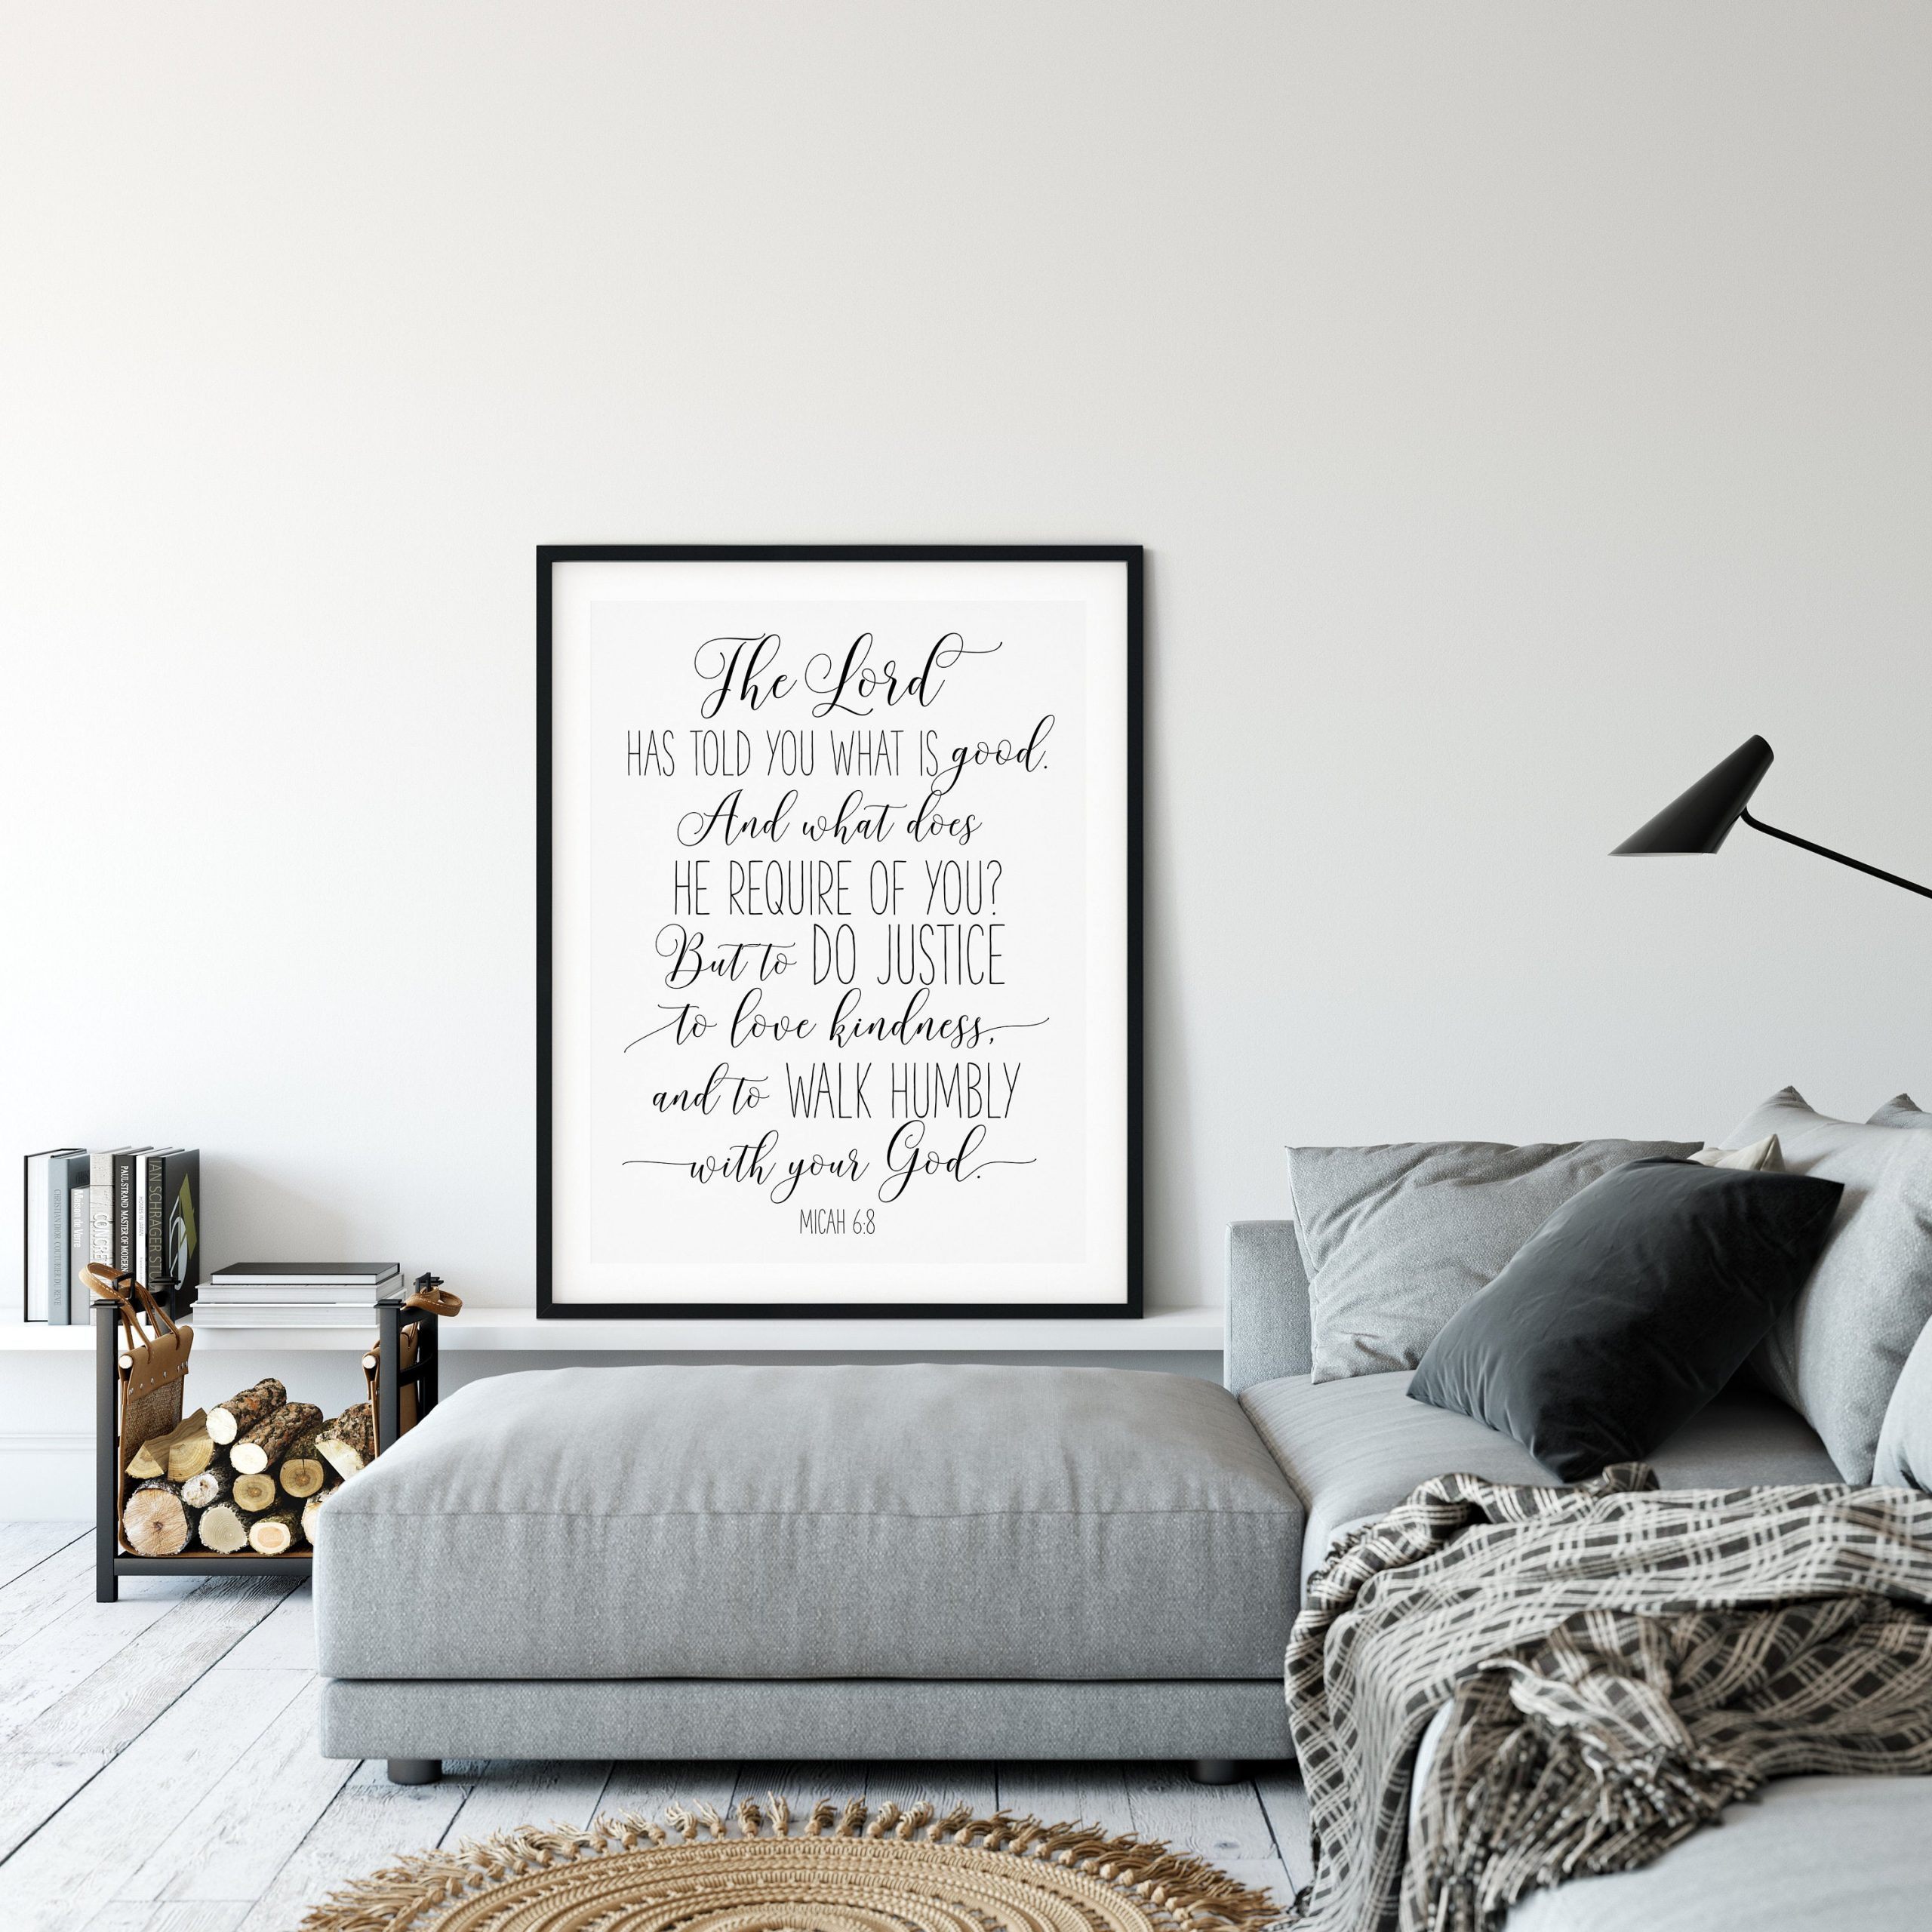 The Lord Has Told You What Is Good, Micah 6:8, Catholic Prayer, Bible Verse Printable,Nursery Decor